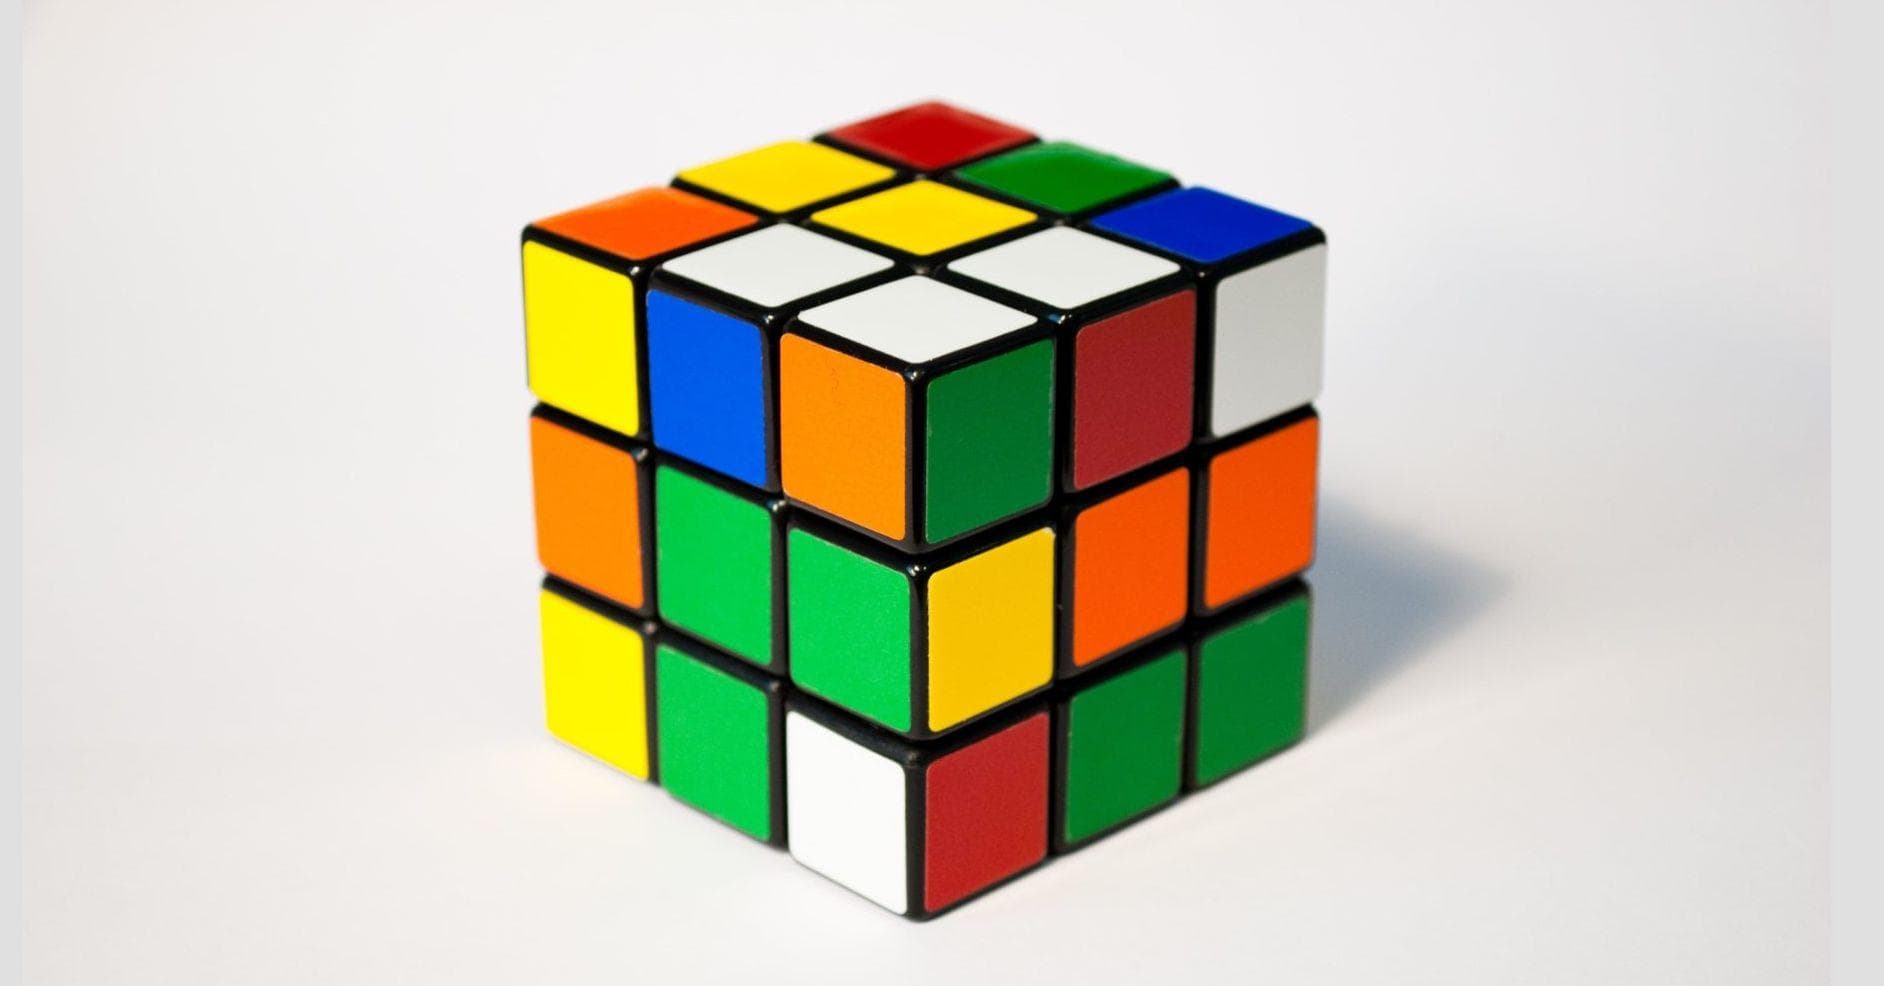 Most Popular Toys in History Include Rubik's Cube, Furby